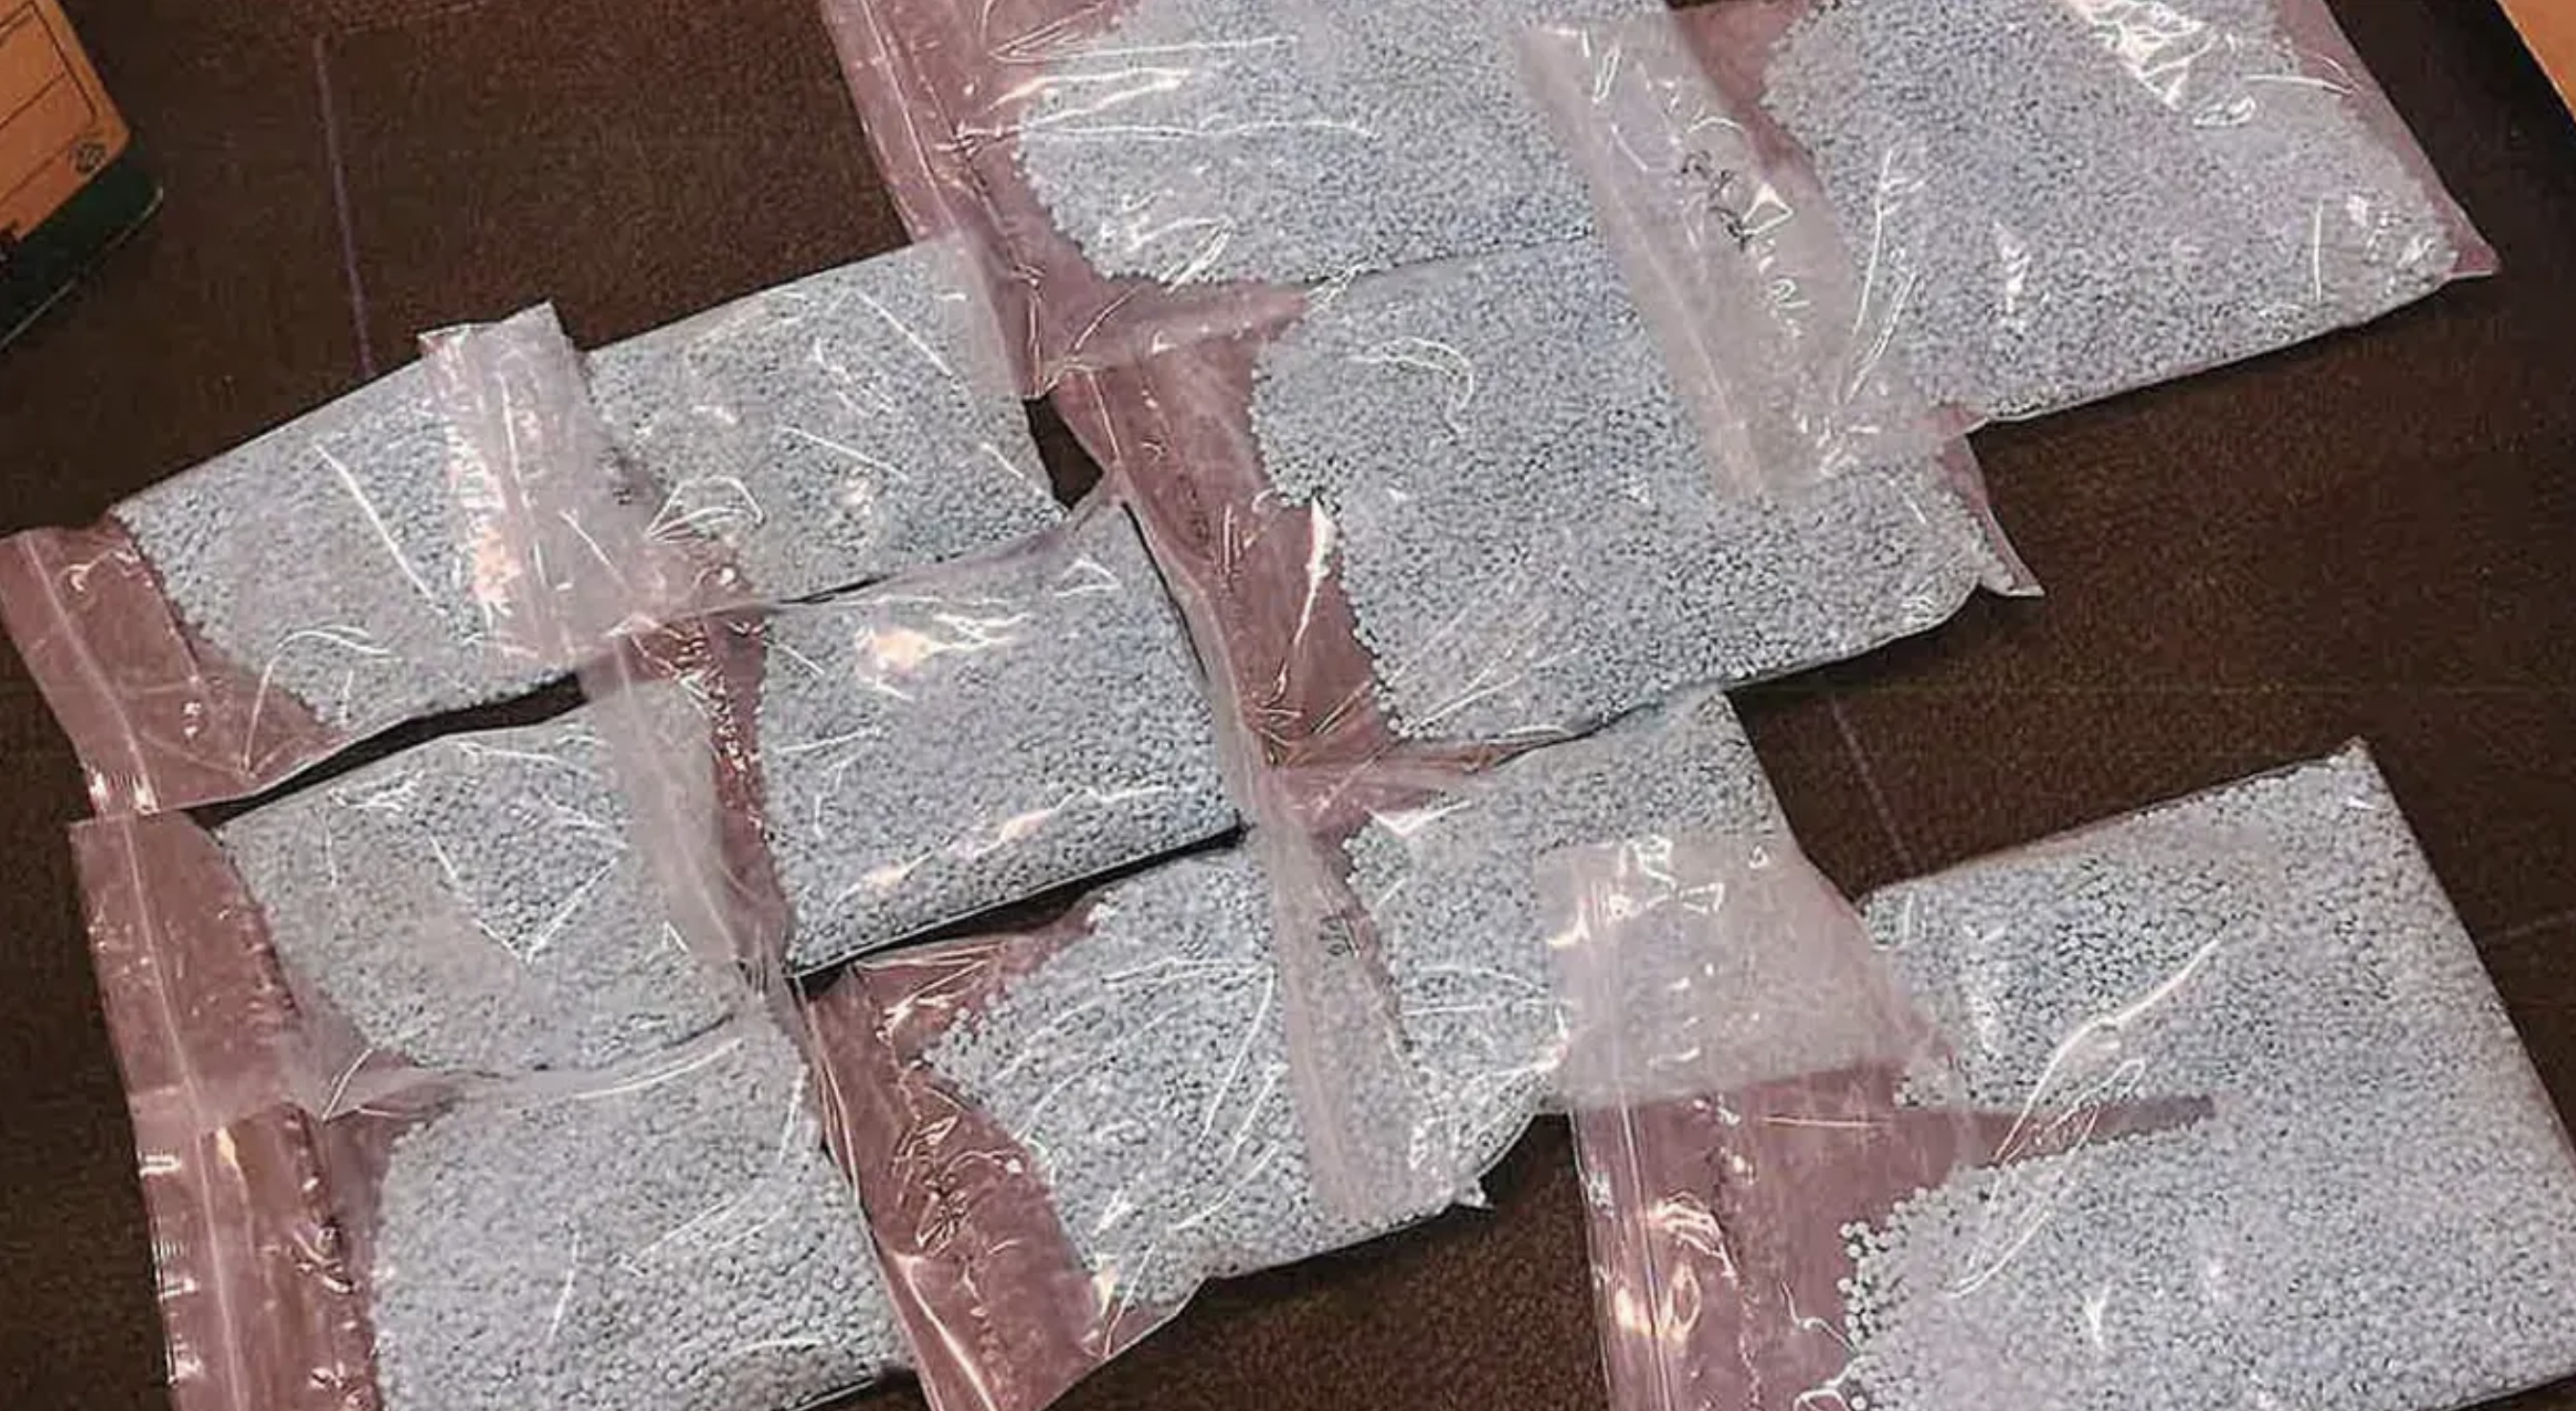 108,000 fentanyl pills seized in massive Bloomington PD drug bust, August 2022 (Bloomington Police) 